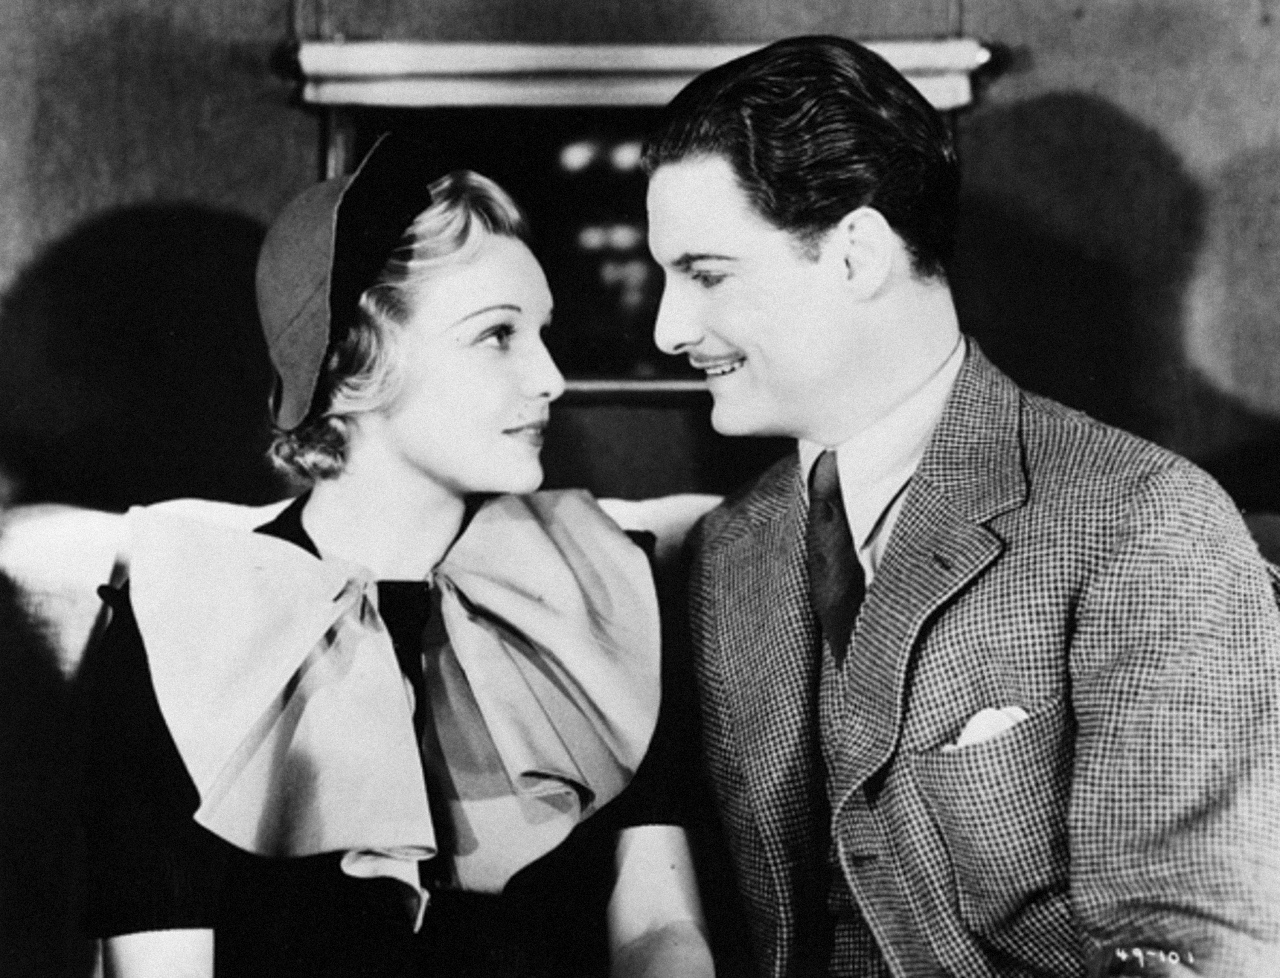 Robert Donat and Madeleine Carroll in The 39 Steps (1935, dir. Alfred Hitchcock) deleted taxi scene ending